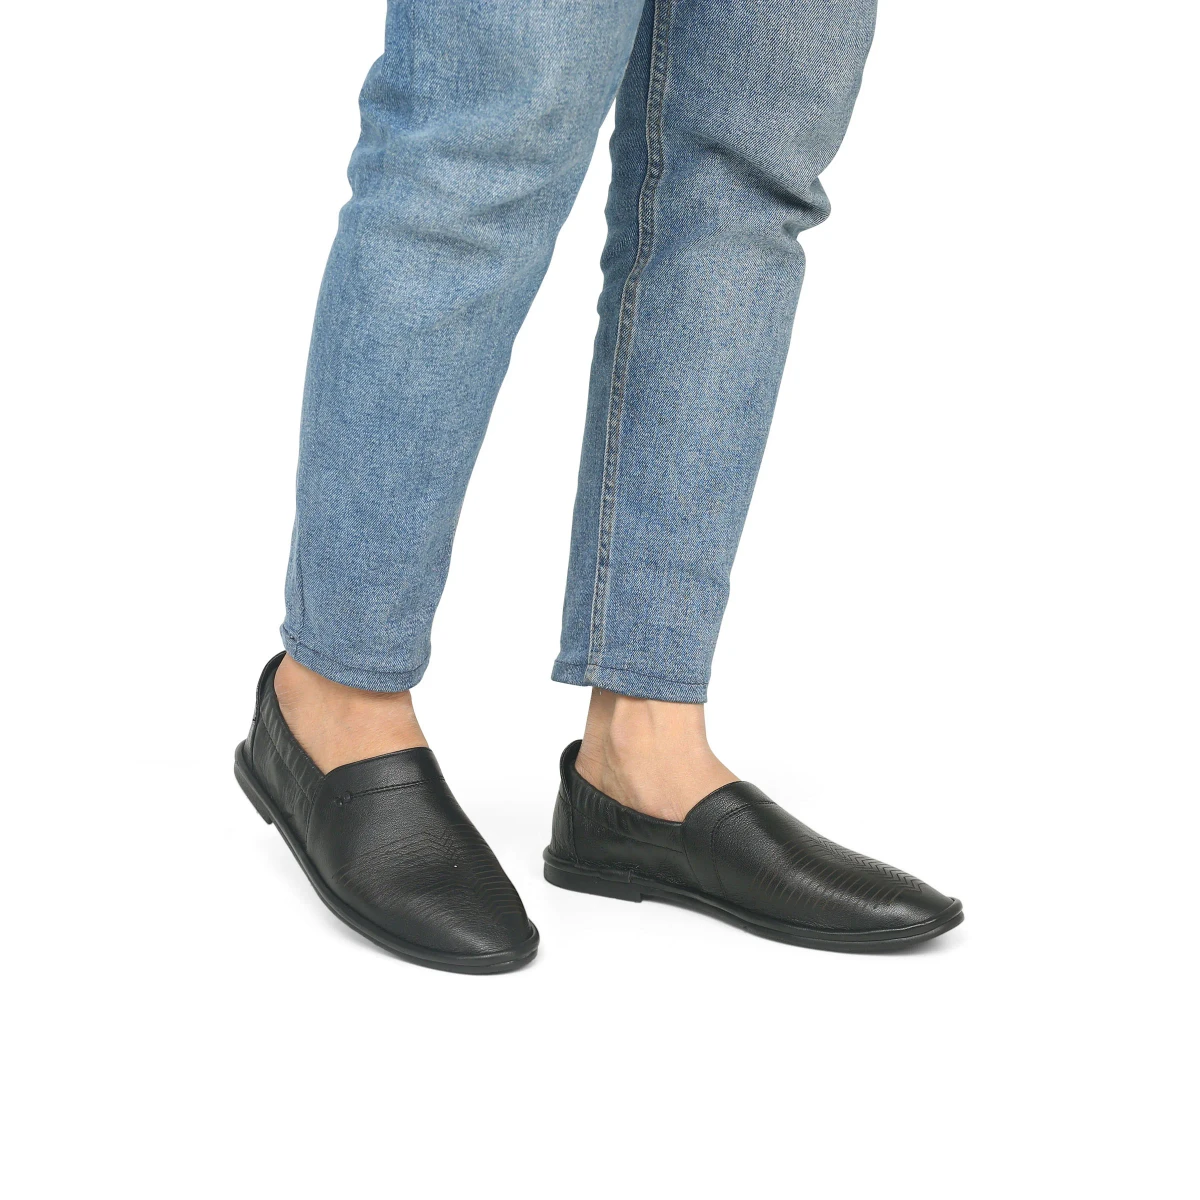 ANON Classic Loafer Man's CL101B